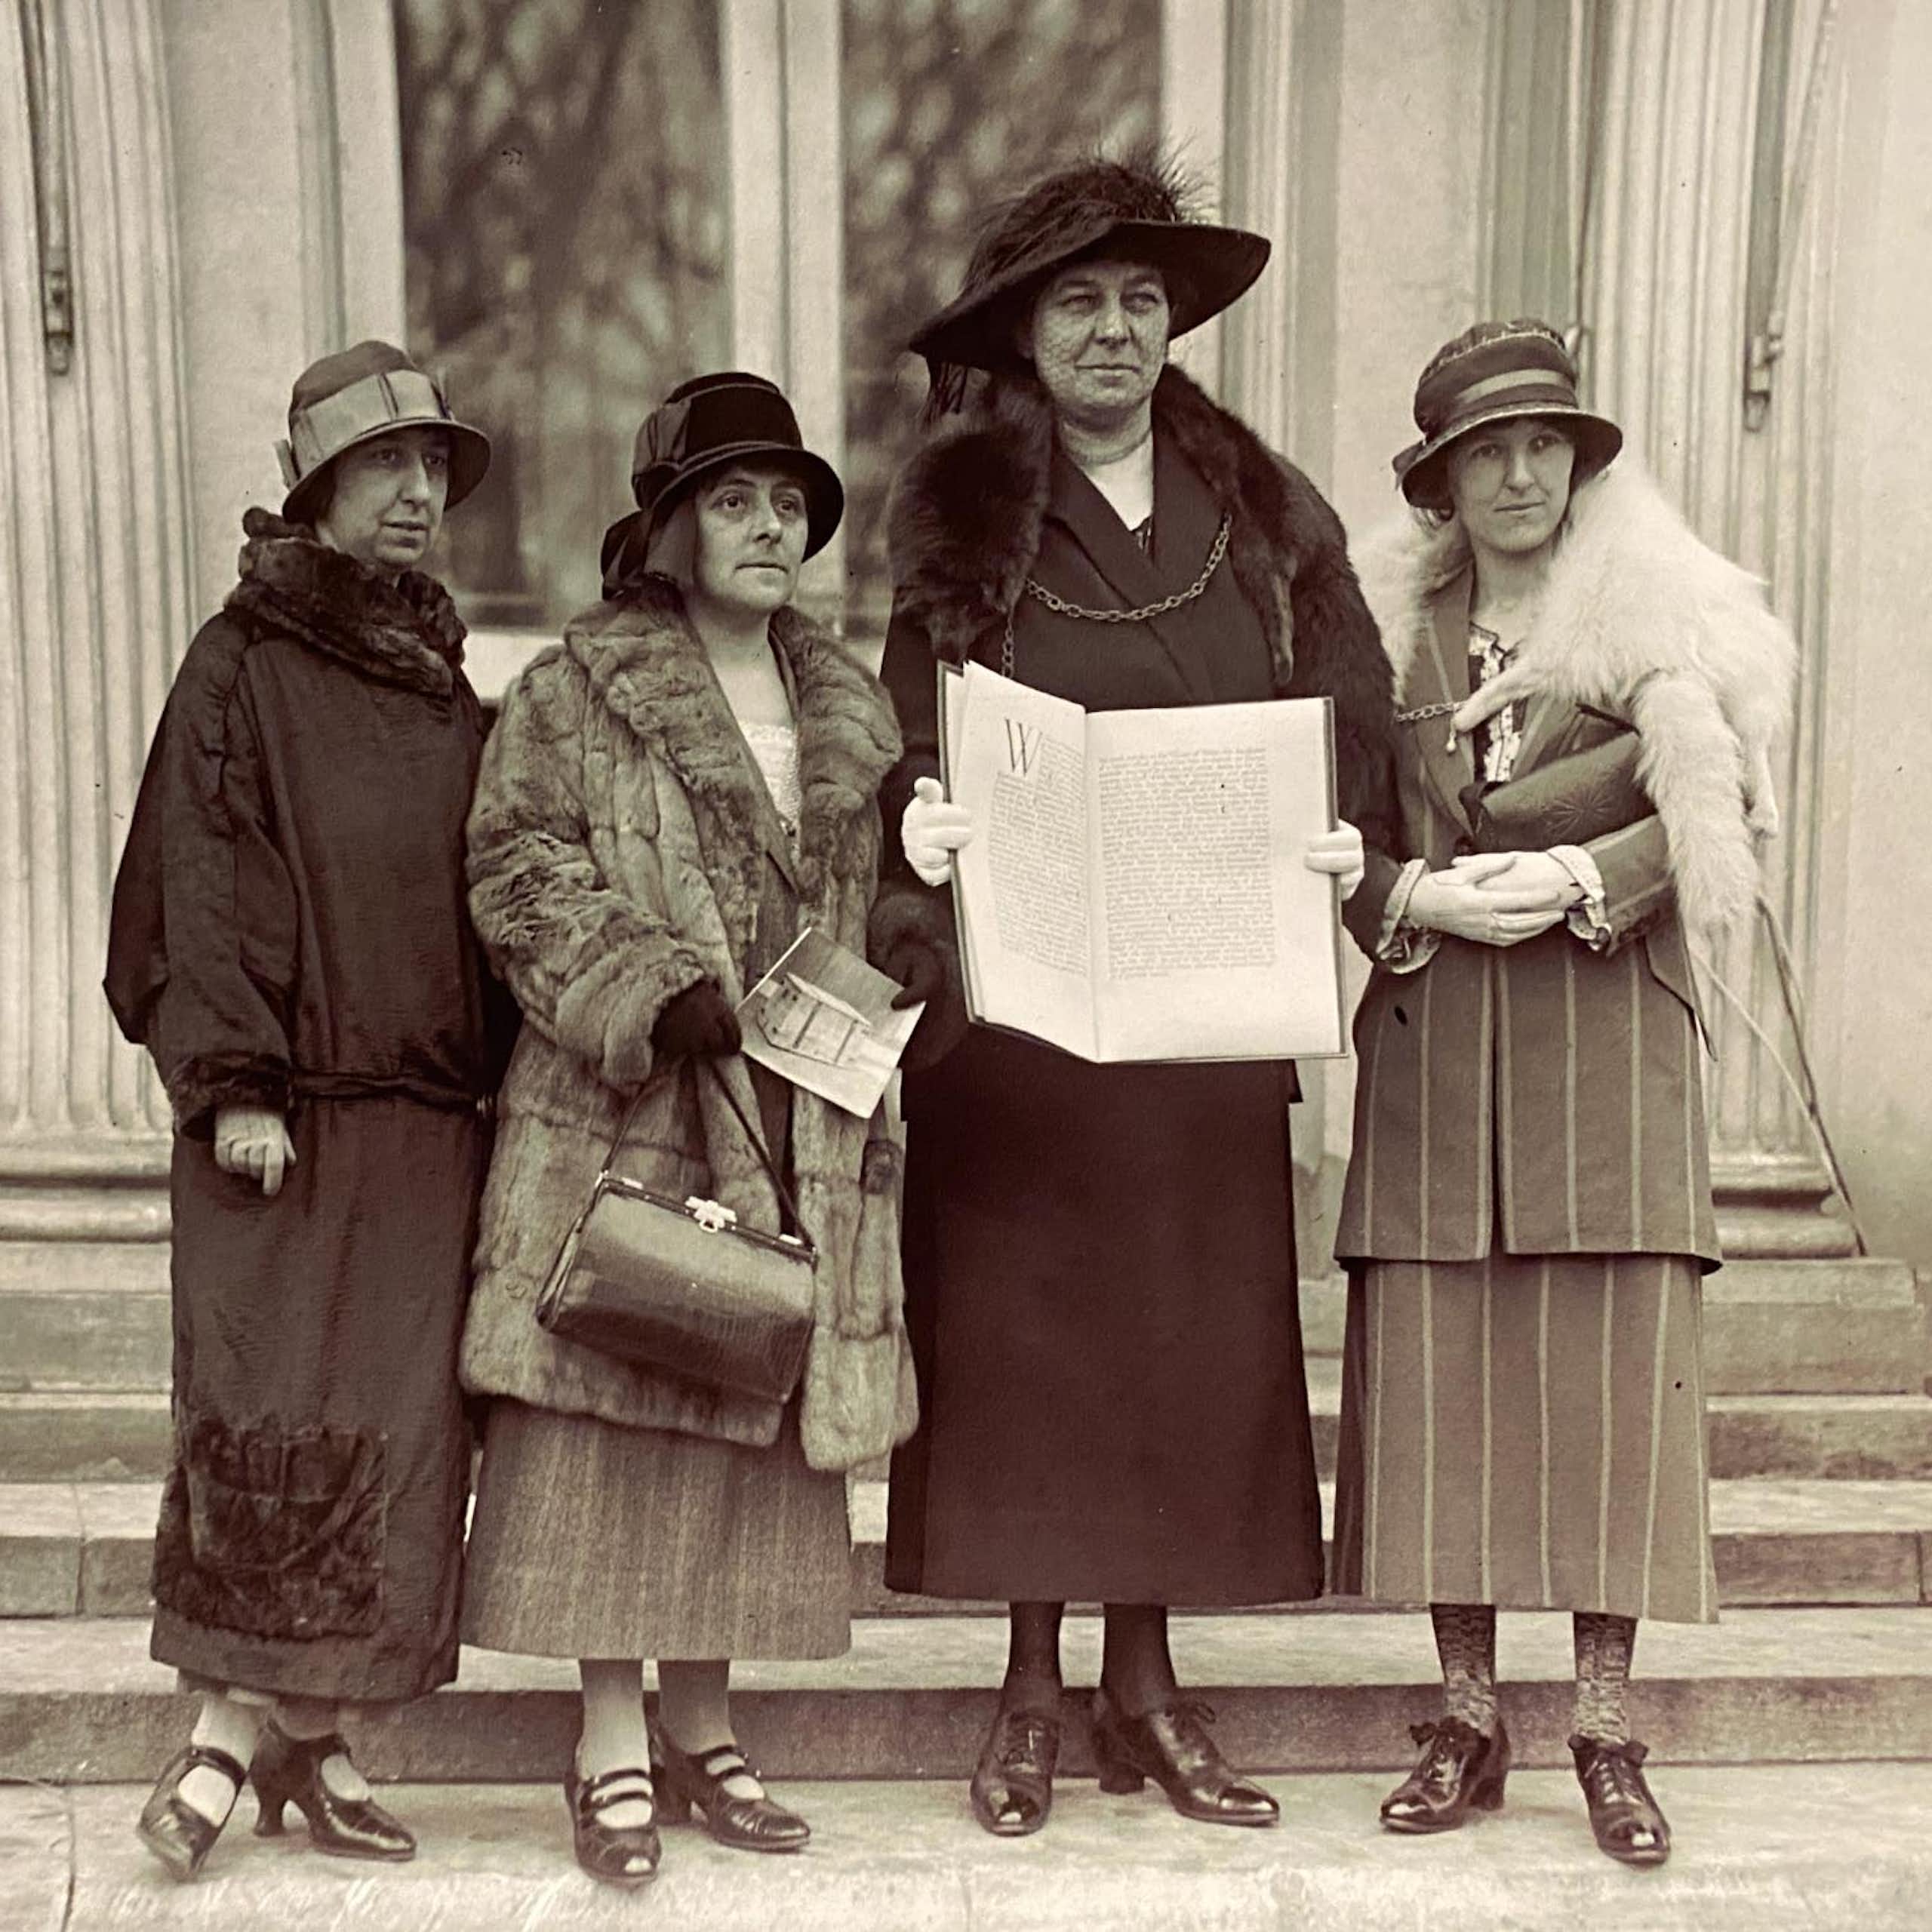 Four smartly dressed women with hats stand with a large book on the steps of the White House